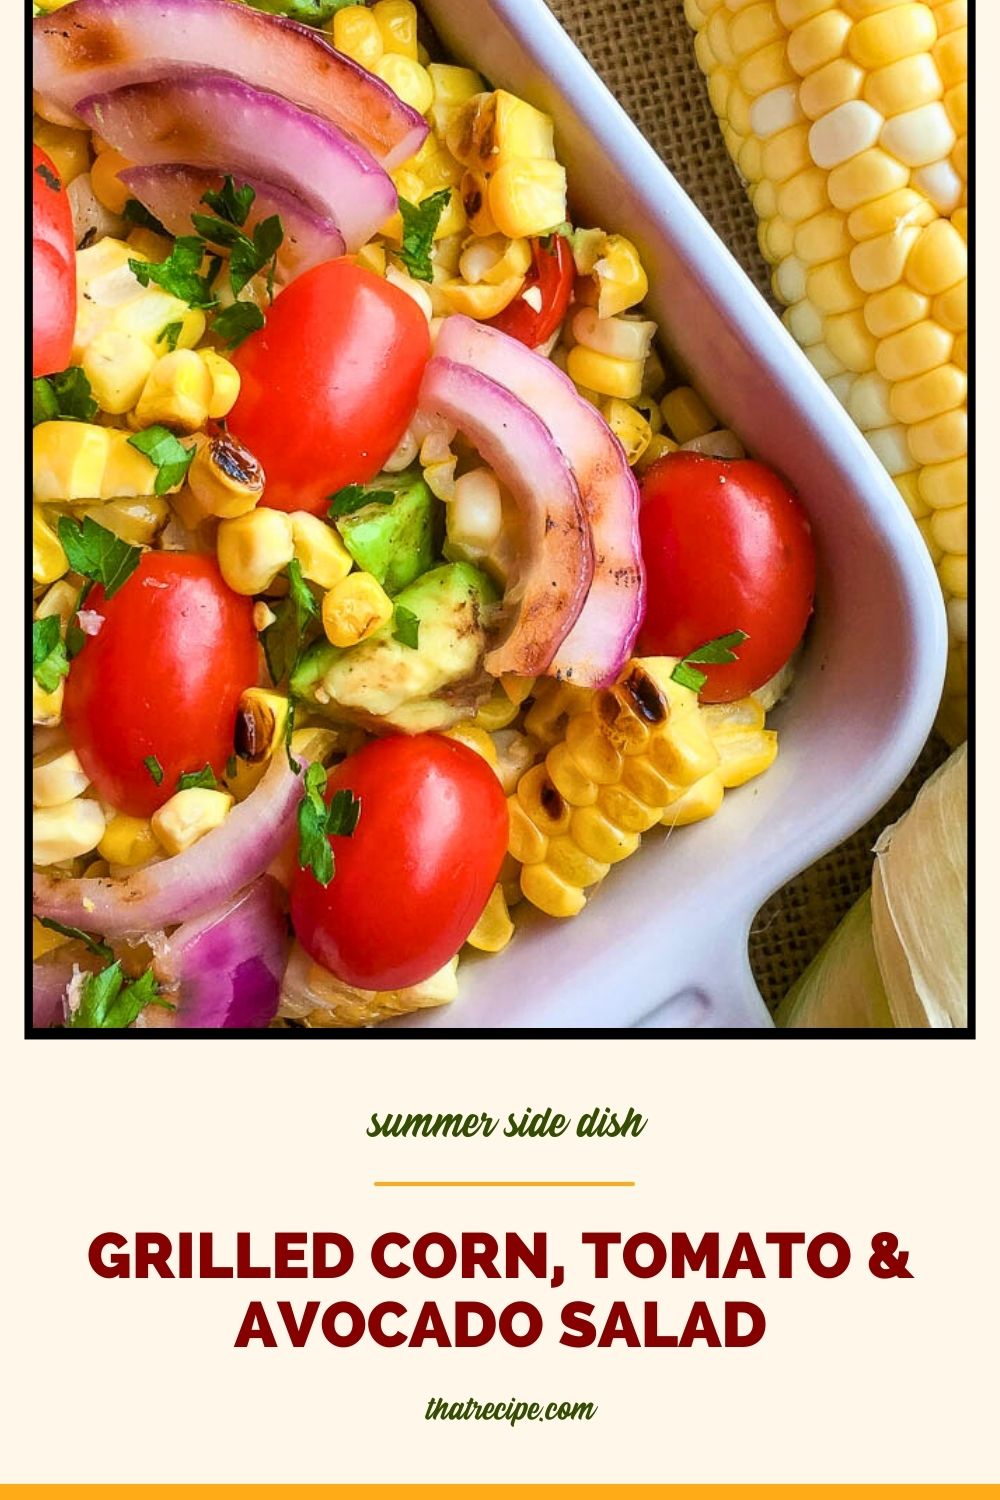 close up of corn and tomato salad and a steak with text overlay "grilled corn tomato and avocado salad"